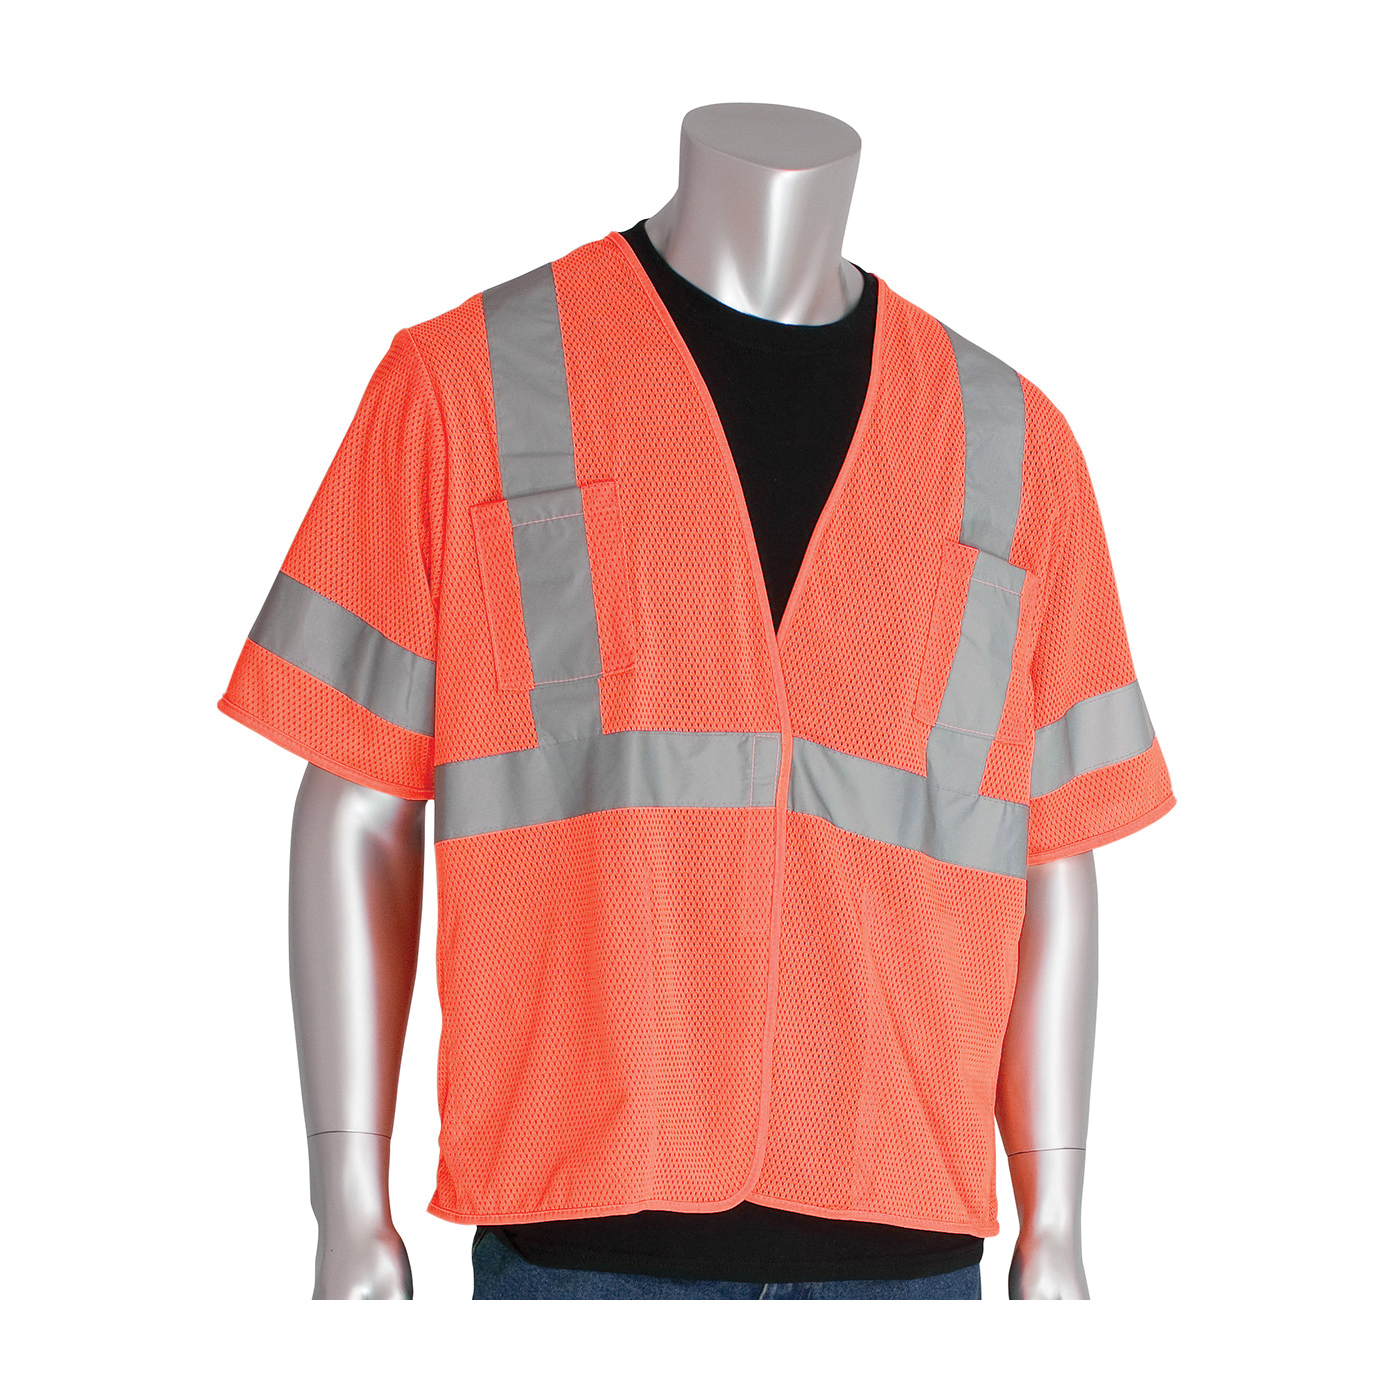 PIP® 303-HSVEOR-XL Safety Vest, XL, Hi-Viz Orange, Polyester Mesh, Hook and Loop Closure, 4 Pockets, ANSI Class: Class 3, Specifications Met: ANSI 107 Type R